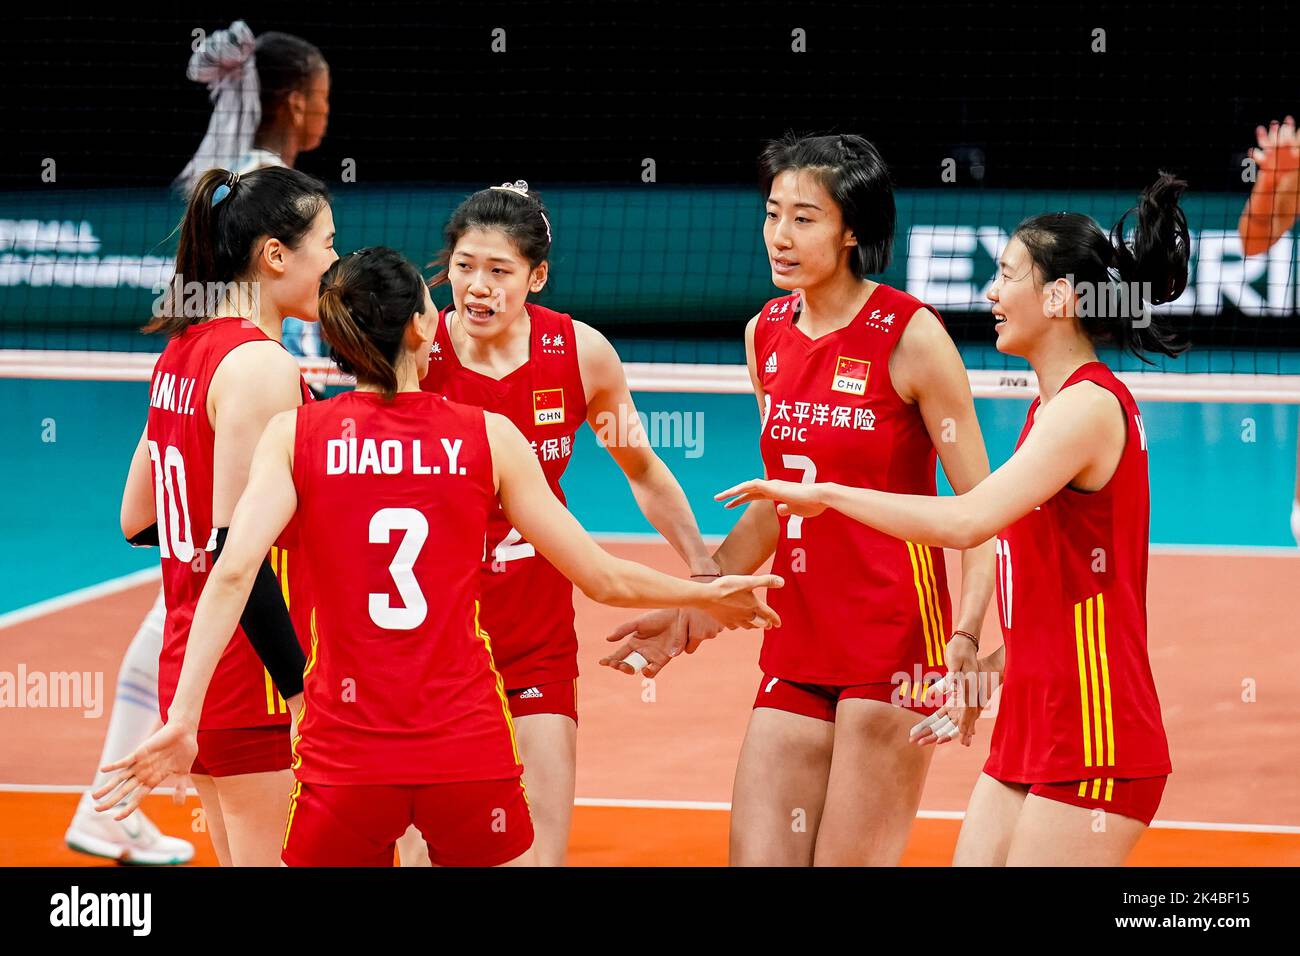 ARNHEM, NETHERLANDS - SEPTEMBER 25: Yingying Li of China, Yuanyuan Wang of China and Yizhu Wang of China celebrate a point with their team mates during the Pool D Phase 1 match between China and Argentina on Day 3 of the FIVB Volleyball Womens World Championship 2022 at the Gelredome on September 25, 2022 in Arnhem, Netherlands (Photo by Rene Nijhuis/Orange Pictures) Stock Photo